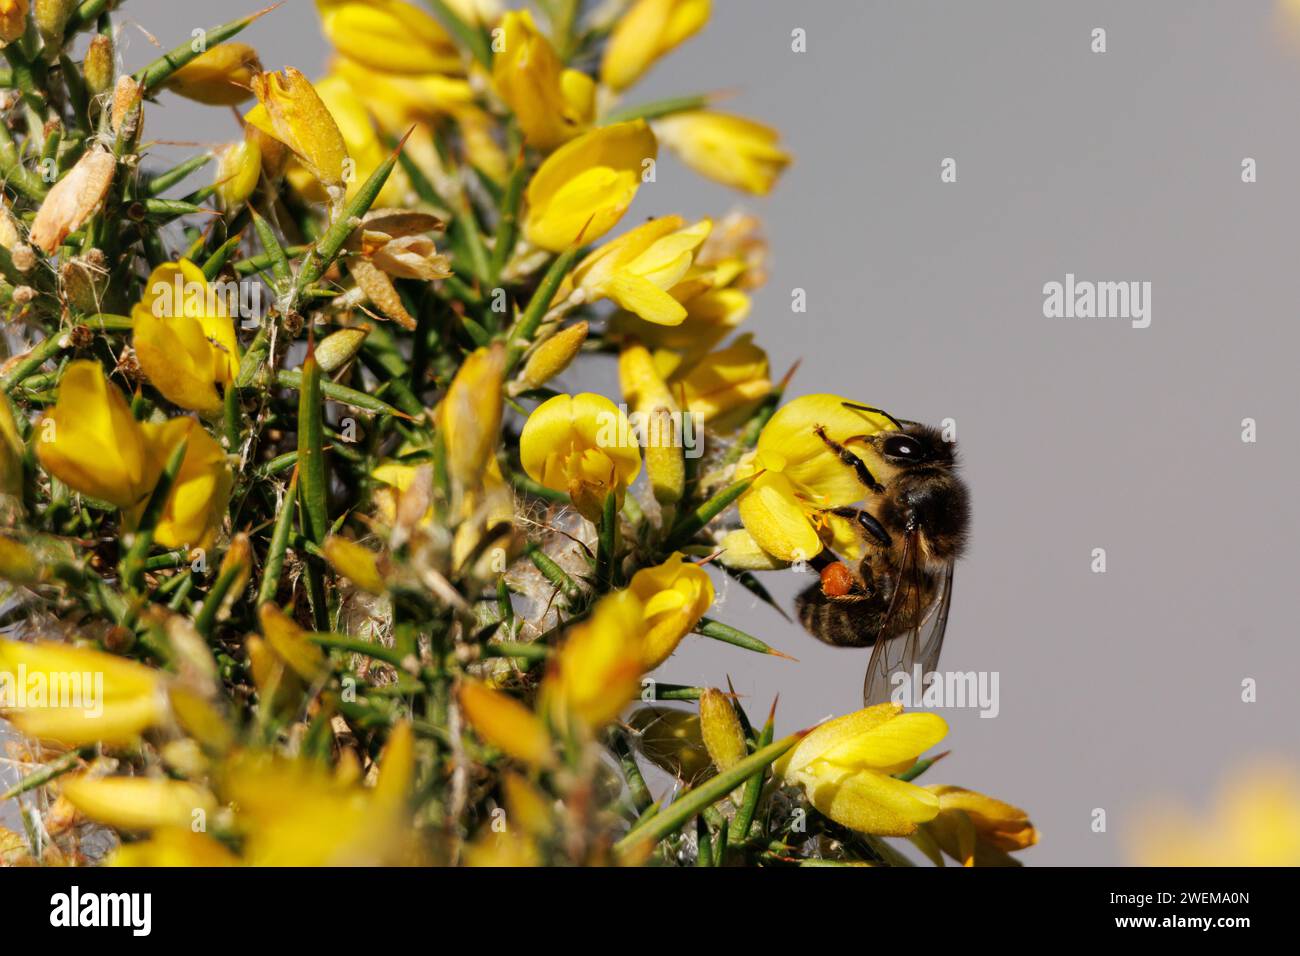 Apis mellifera bee collecting nectar from the flower of the Genista monspessulana bush in the Sierra Mariola de Alcoi, Spain Stock Photo